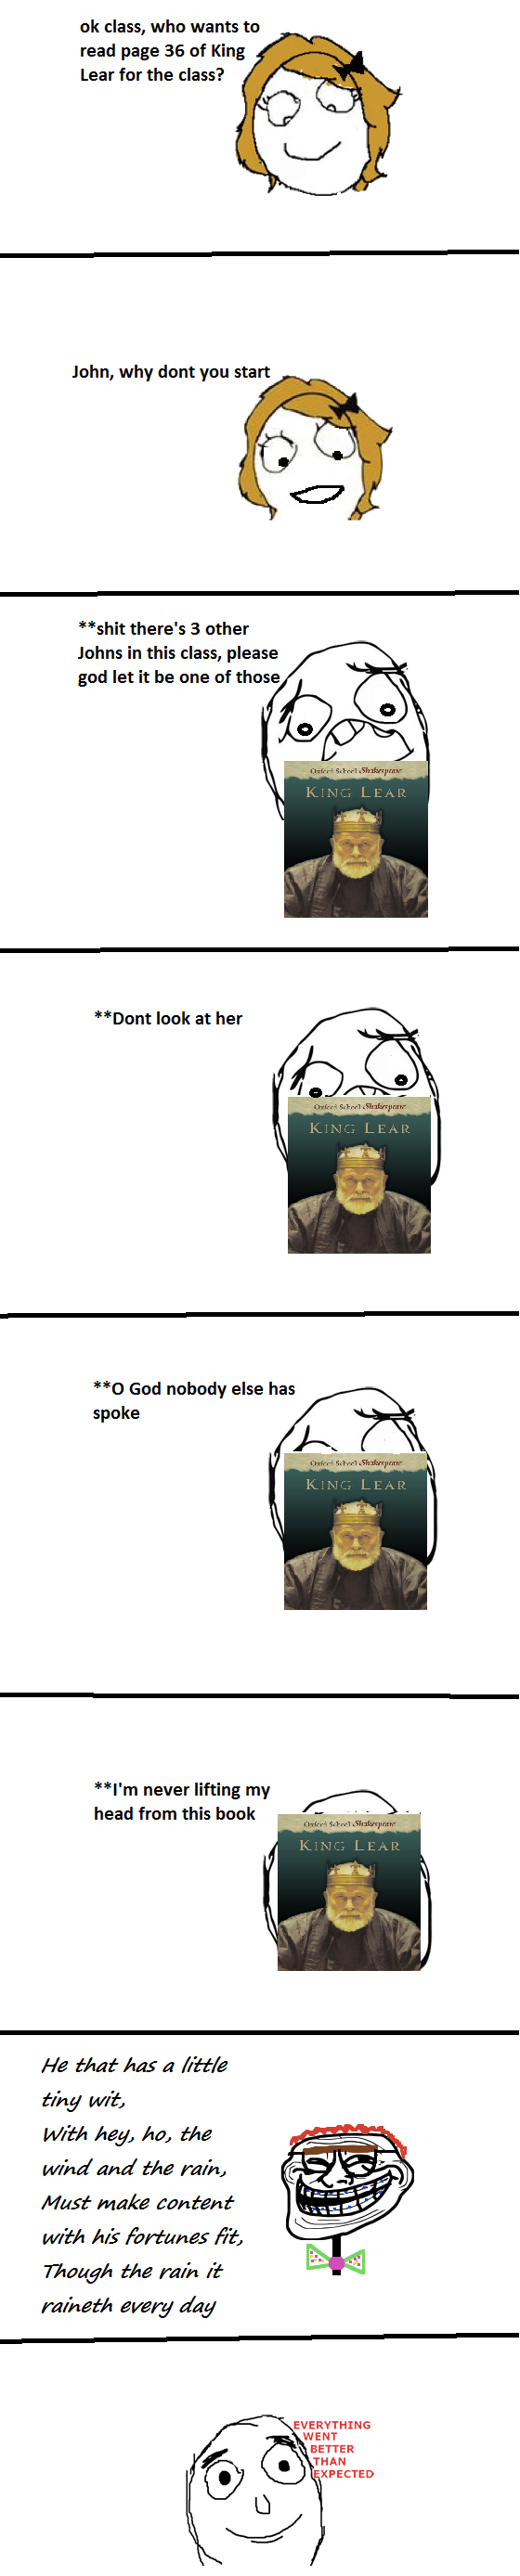 king_lear.png